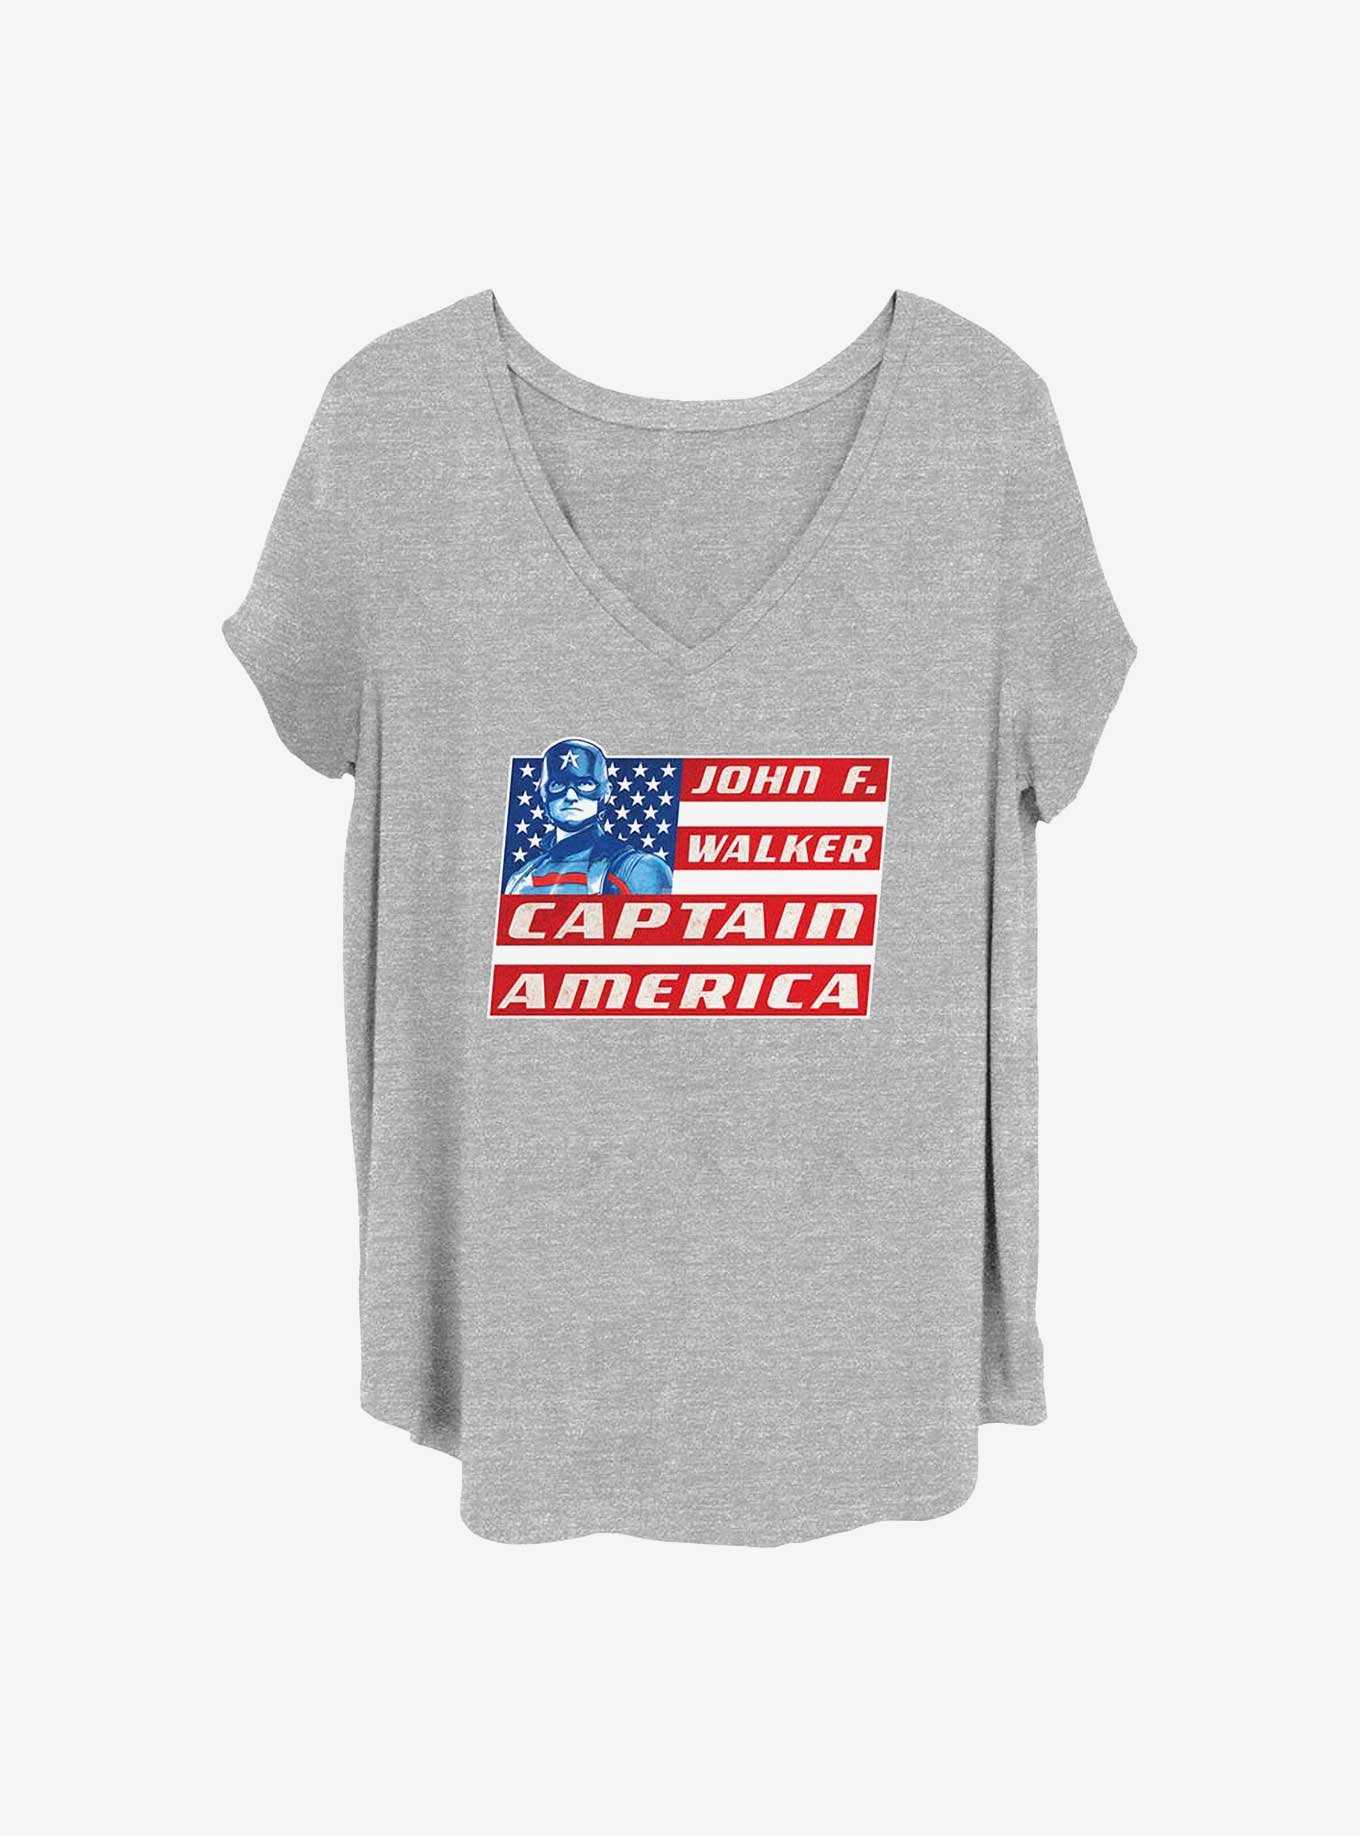 Marvel The Falcon and the Winter Soldier Capltain Walker Girls T-Shirt Plus Size, , hi-res